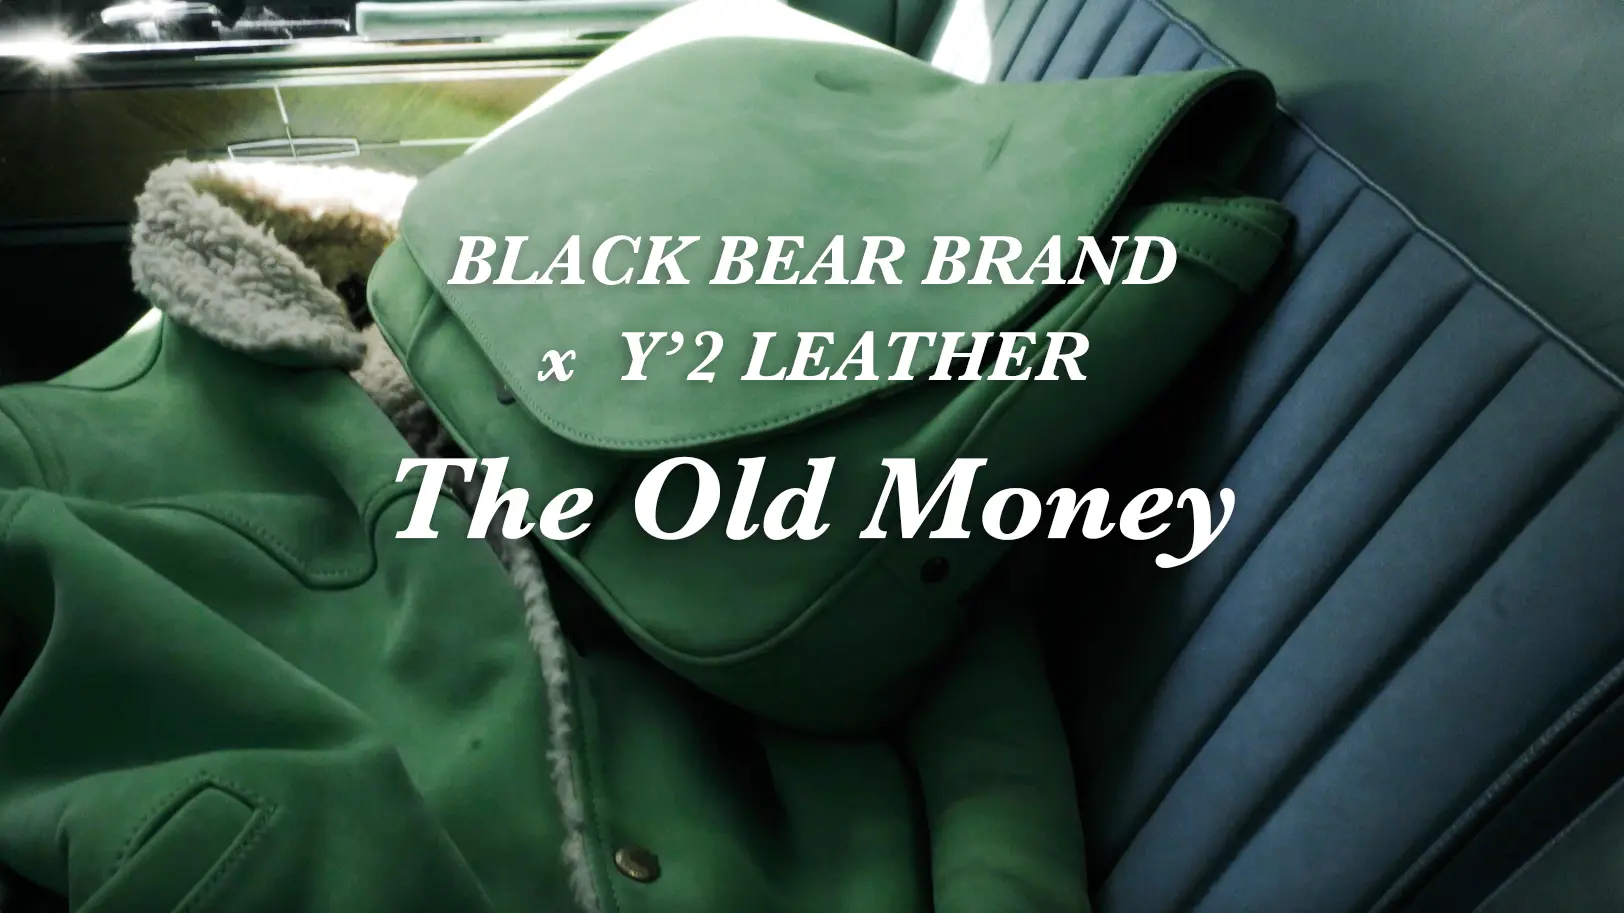 BLACK BEAR BRAND x Y'2 LEATHER - The Old Money short movie release leather jacket brand